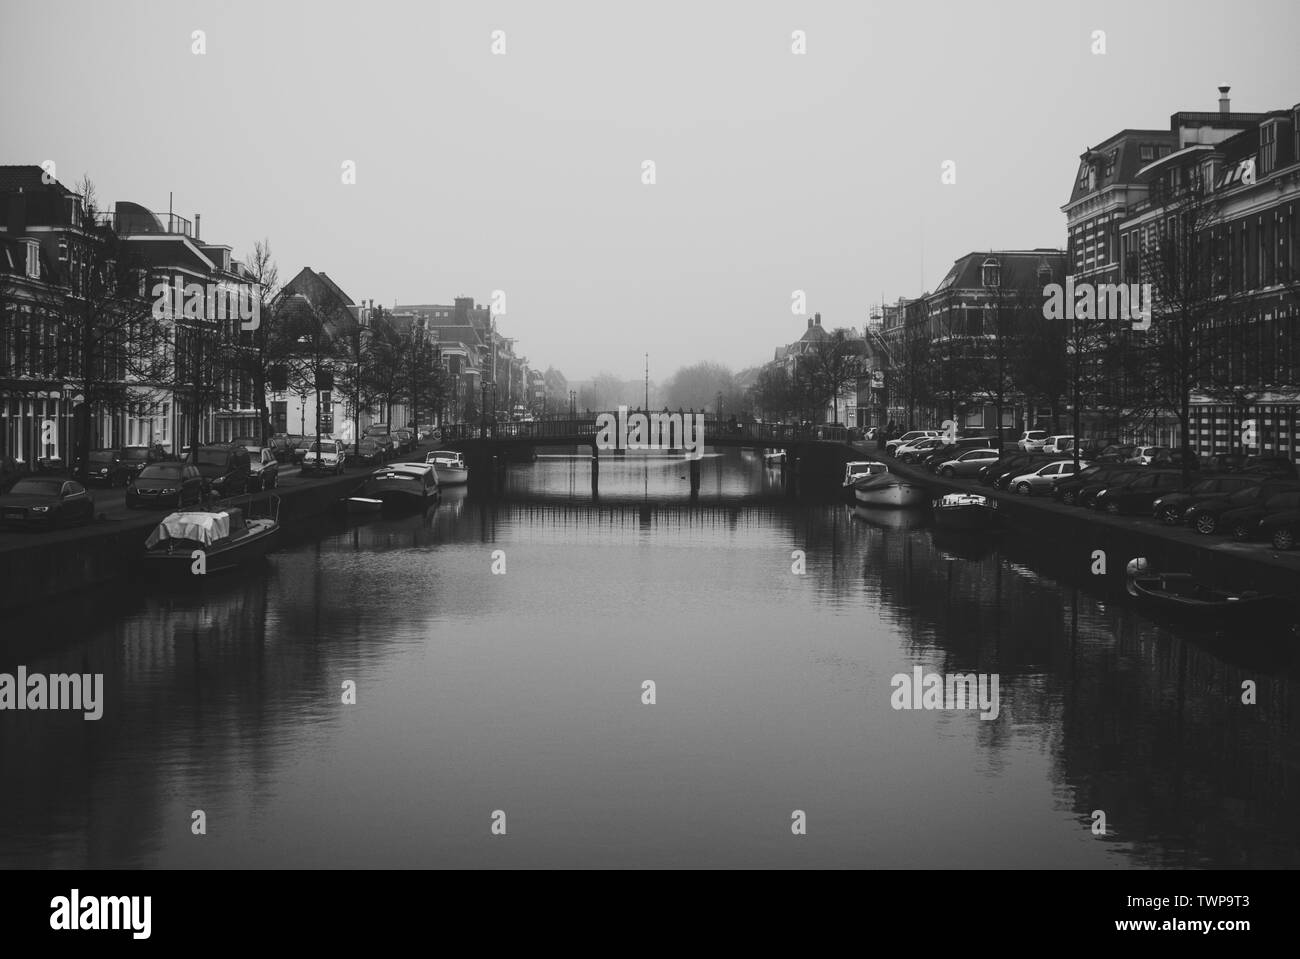 Charming cityscape of old Dutch town Haarlem. Stone bridge connecting two banks of the Spaarne river. Beautiful perspective. Misty and cloudy early sp Stock Photo